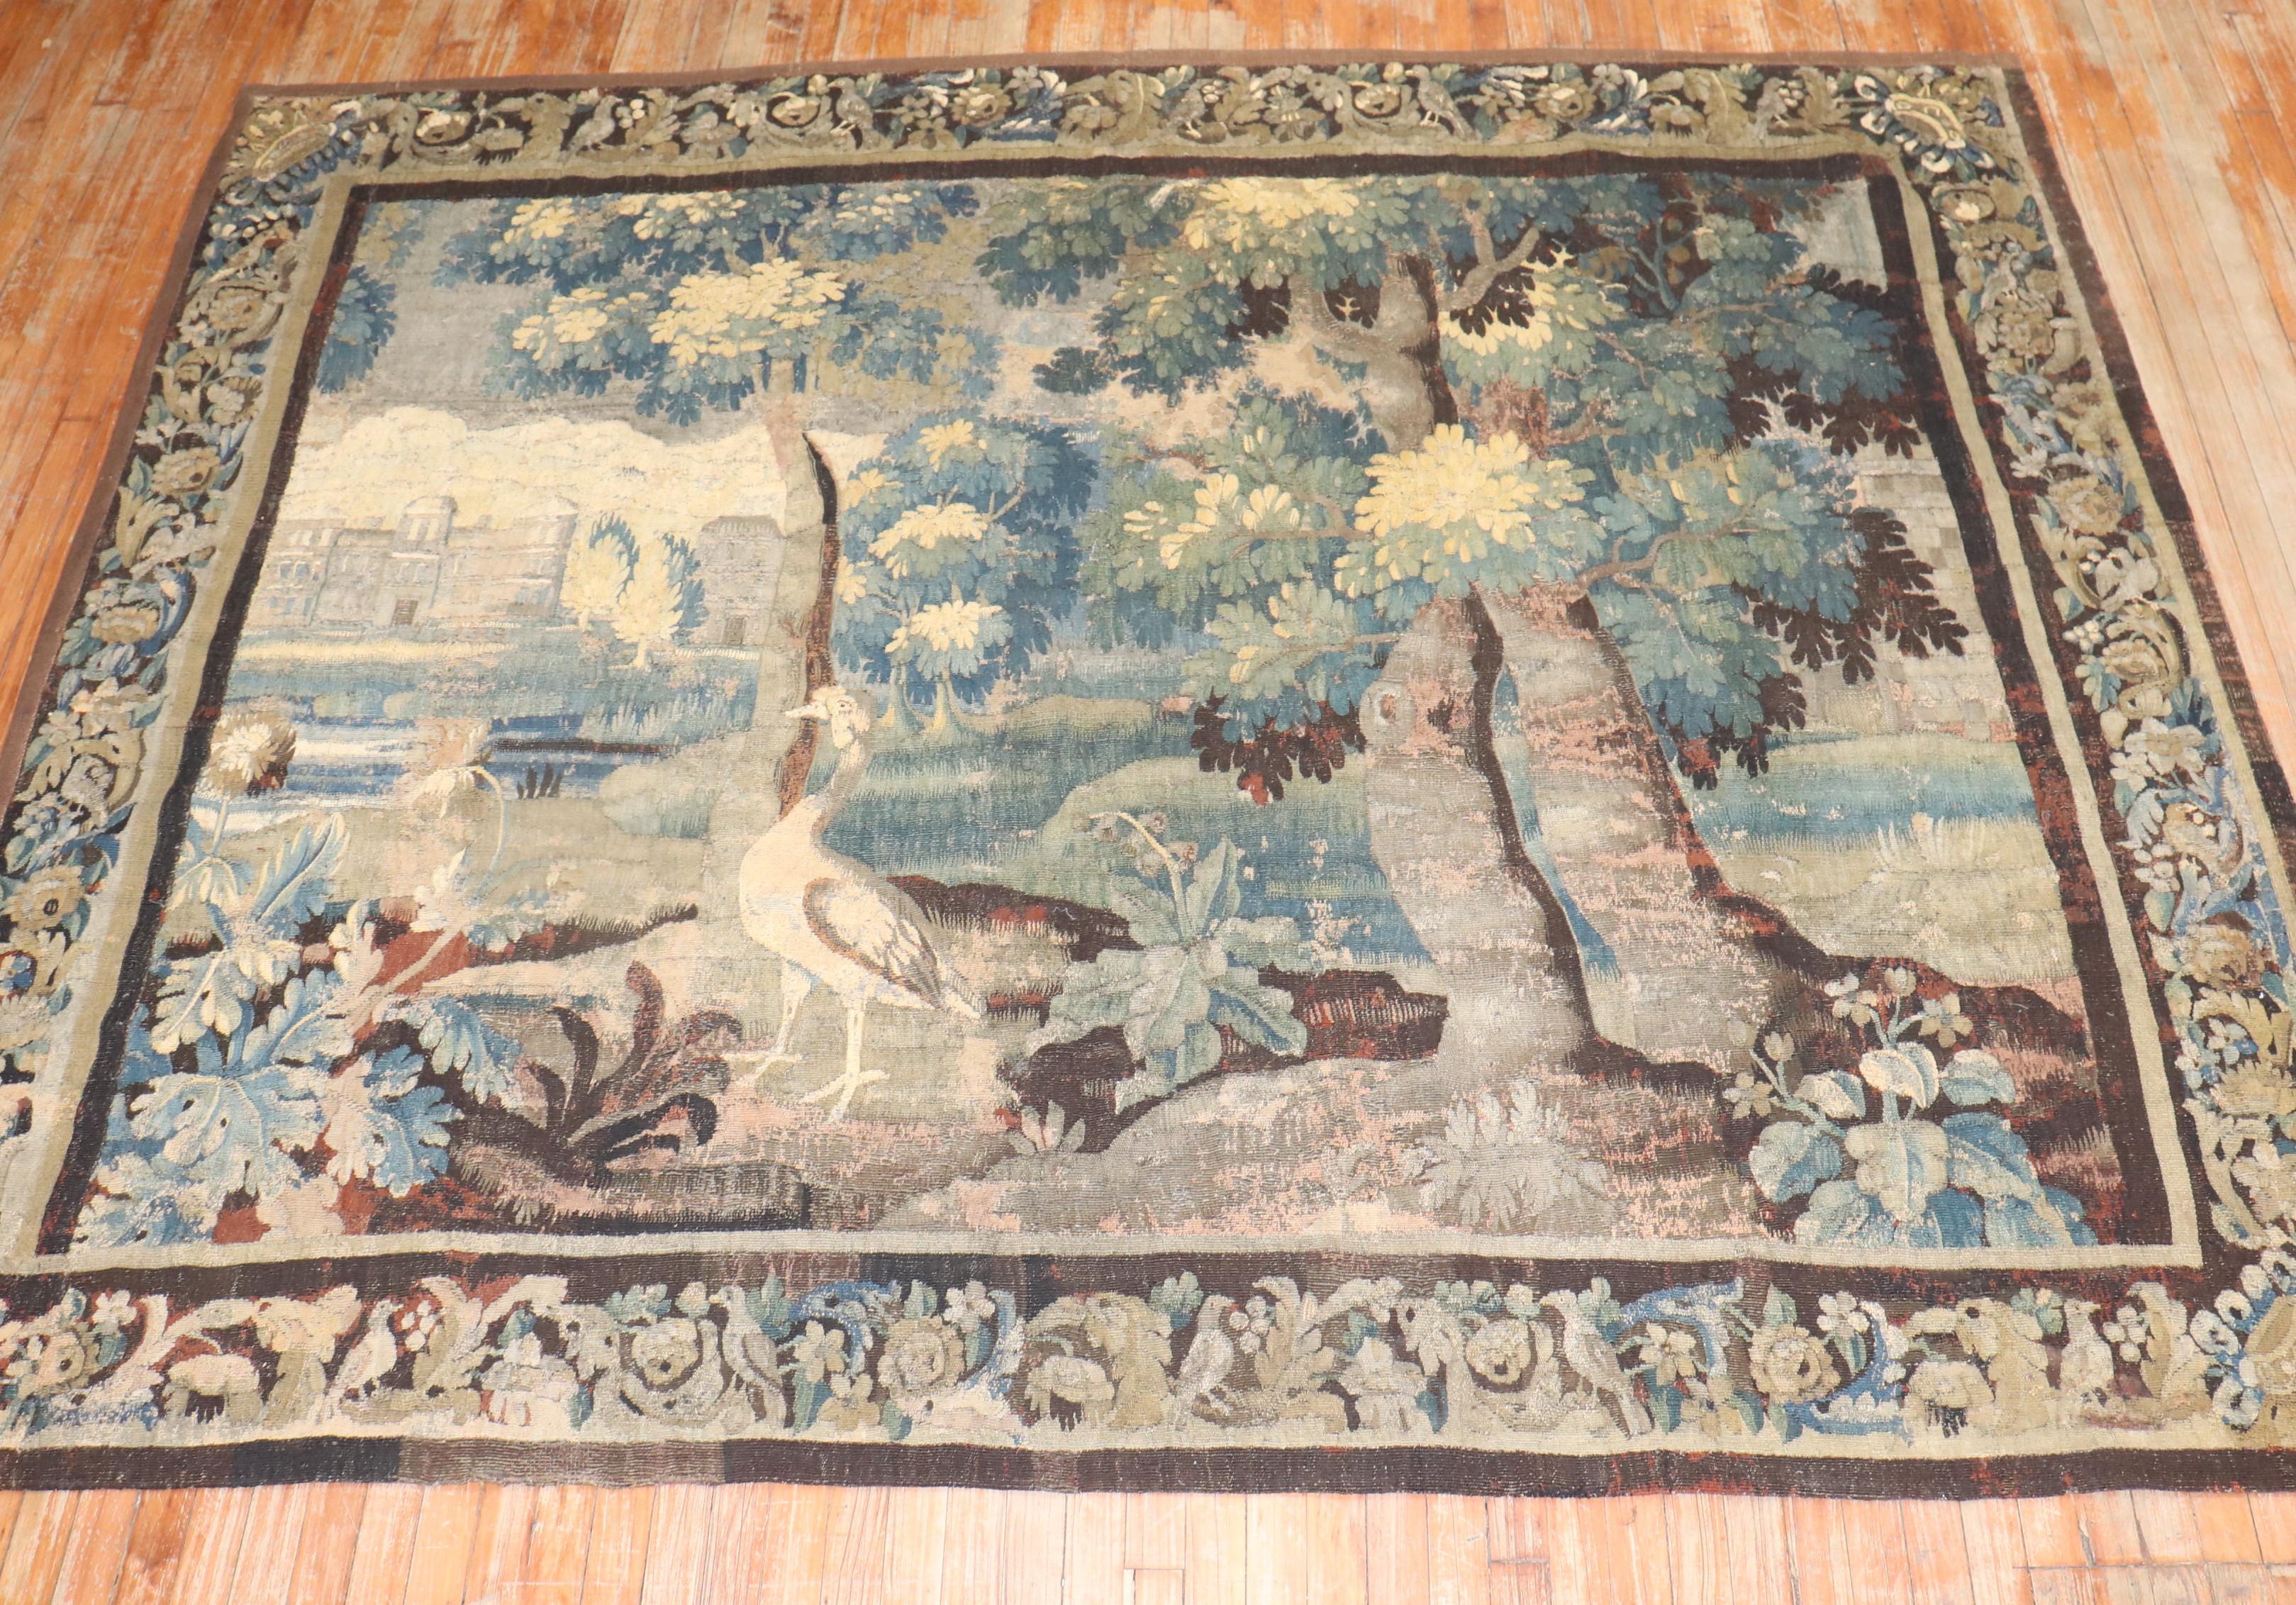 a late 18th century Flemish Vedure Tapestry

Measures: 7'4'' wide x 9' long.

Tapestries make integral part of the Flemish cultural heritage. Most of the tapestries have religious, mythological and historical subjects as well as hunting and harvest